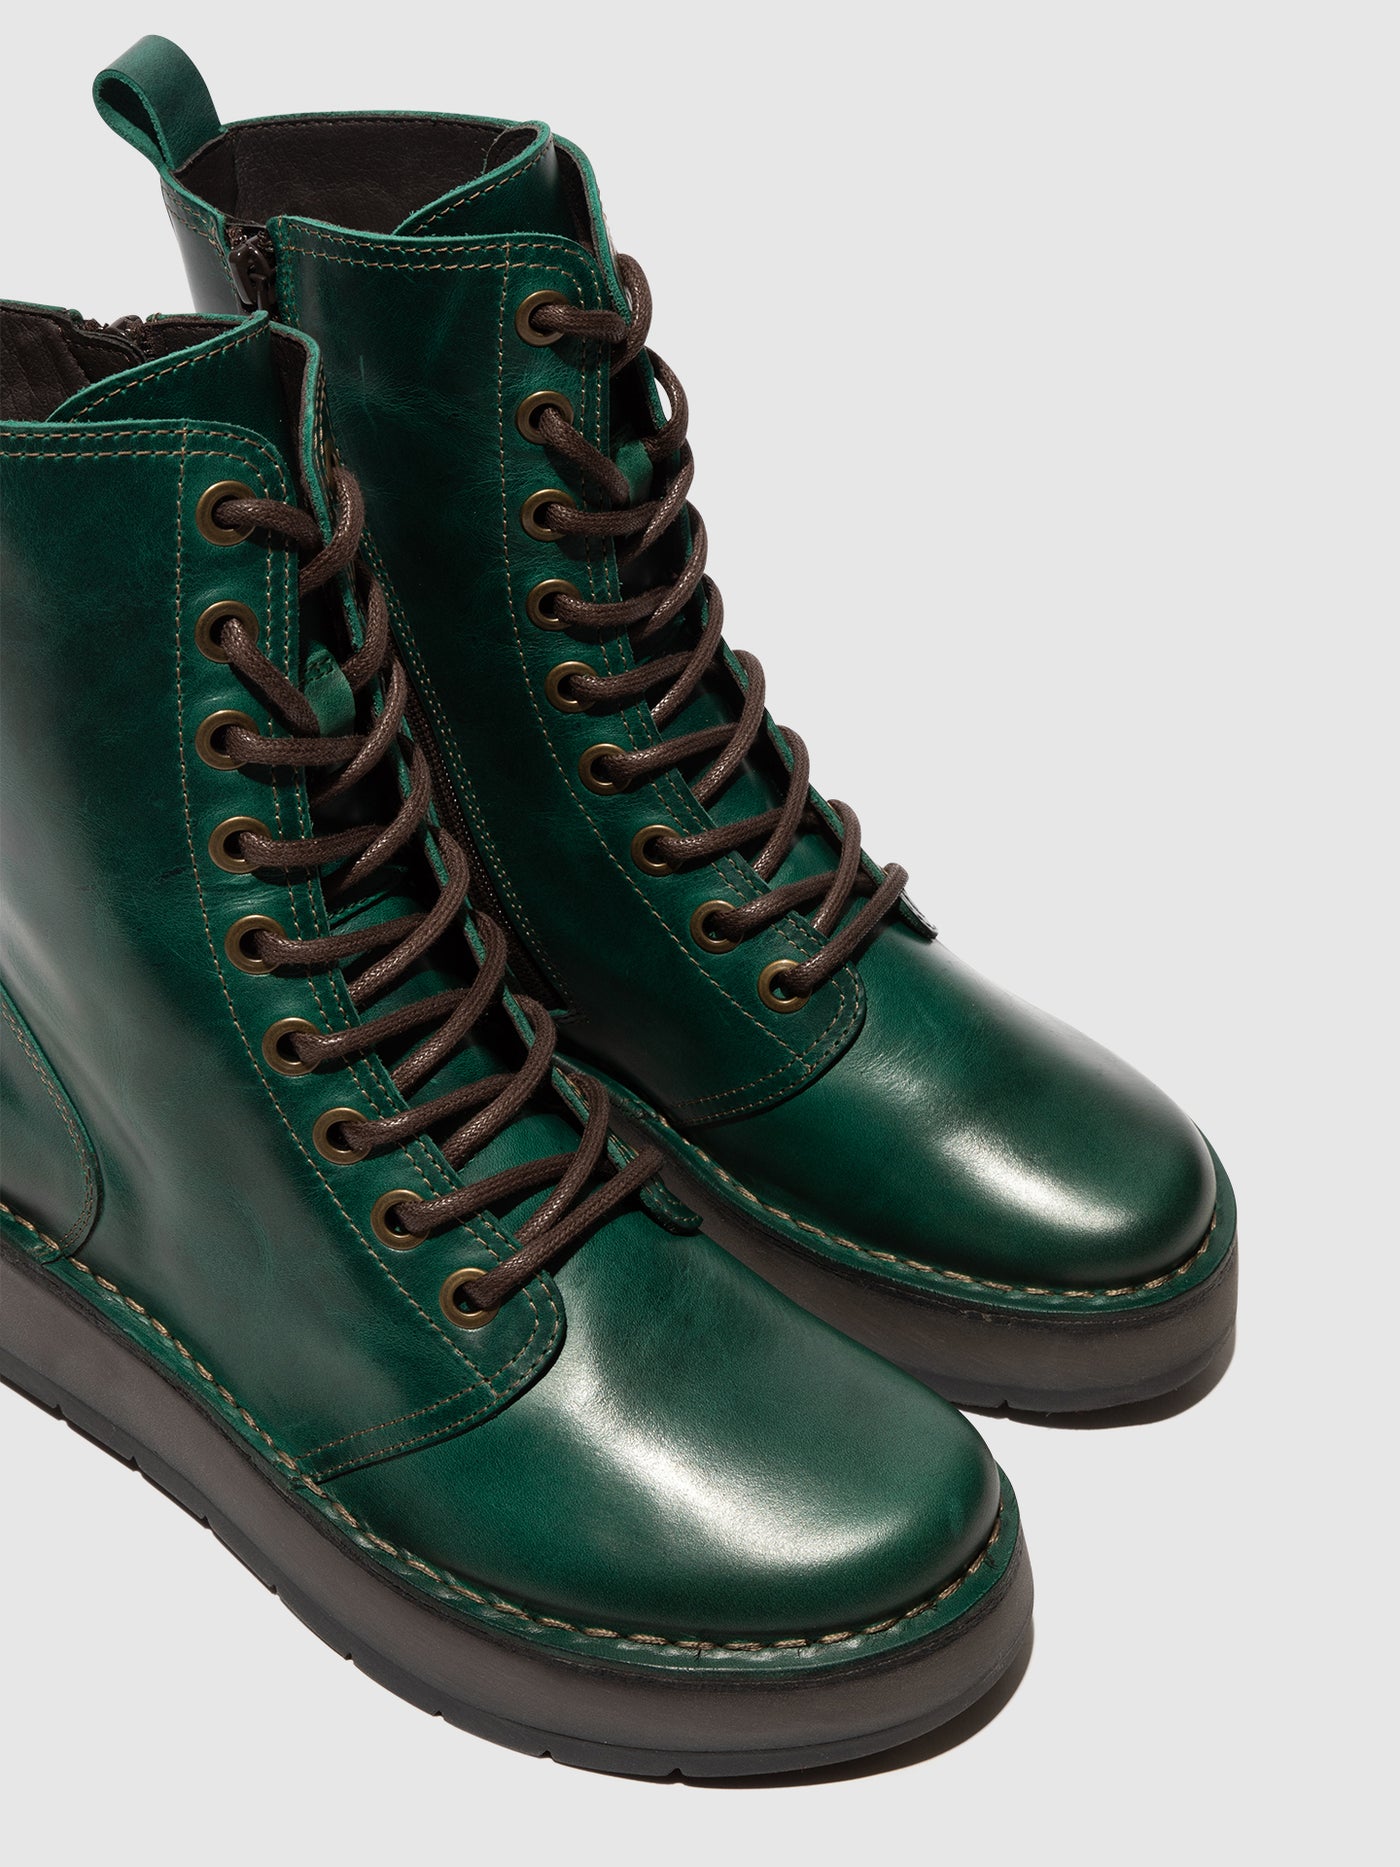 Lace-up Ankle Boots RAMI043FLY SHAMROCK GREEN